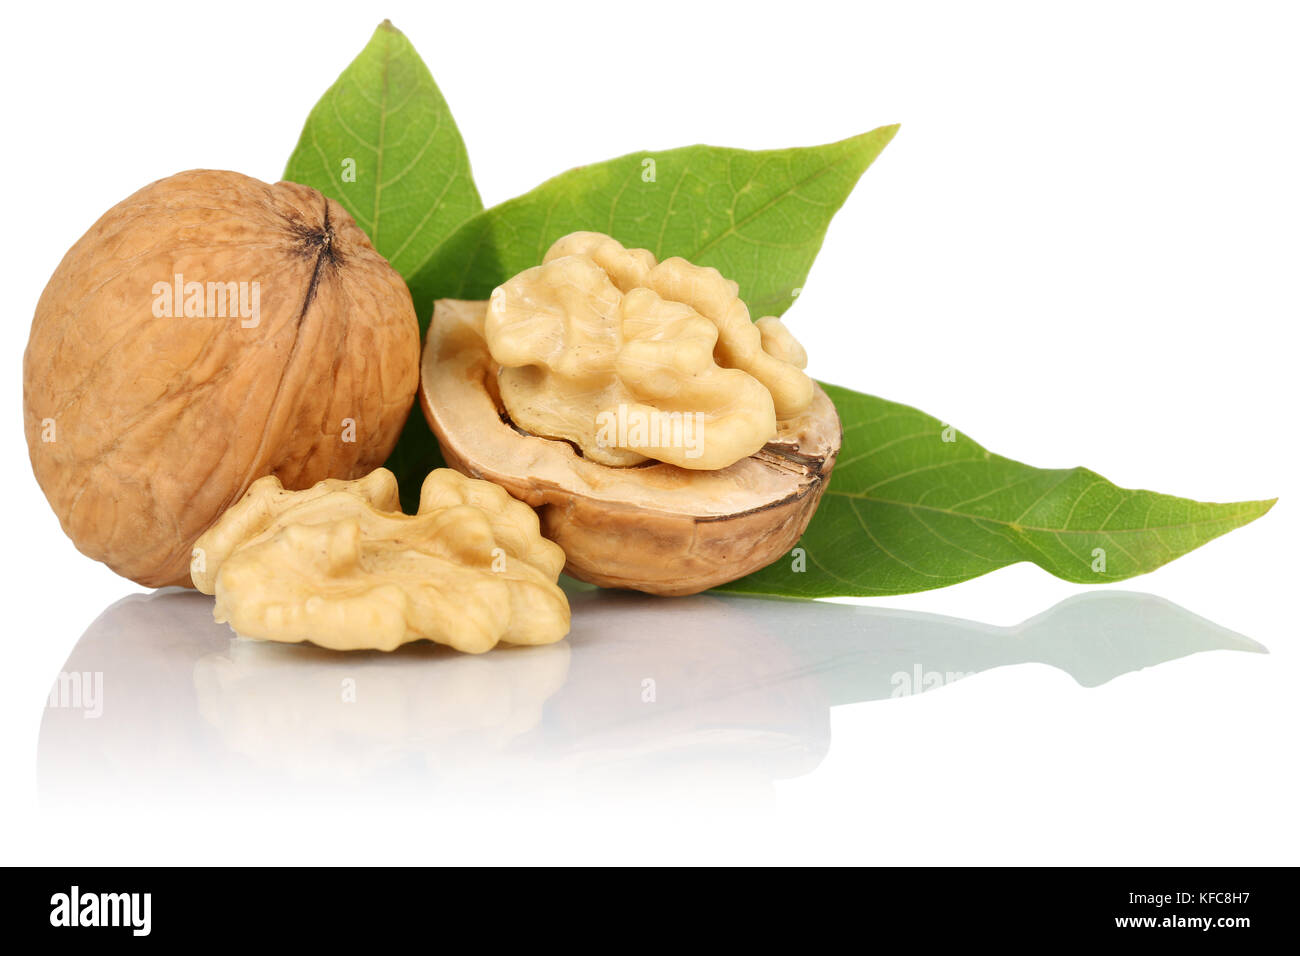 Walnuts walnut nuts isolated on a white background Stock Photo